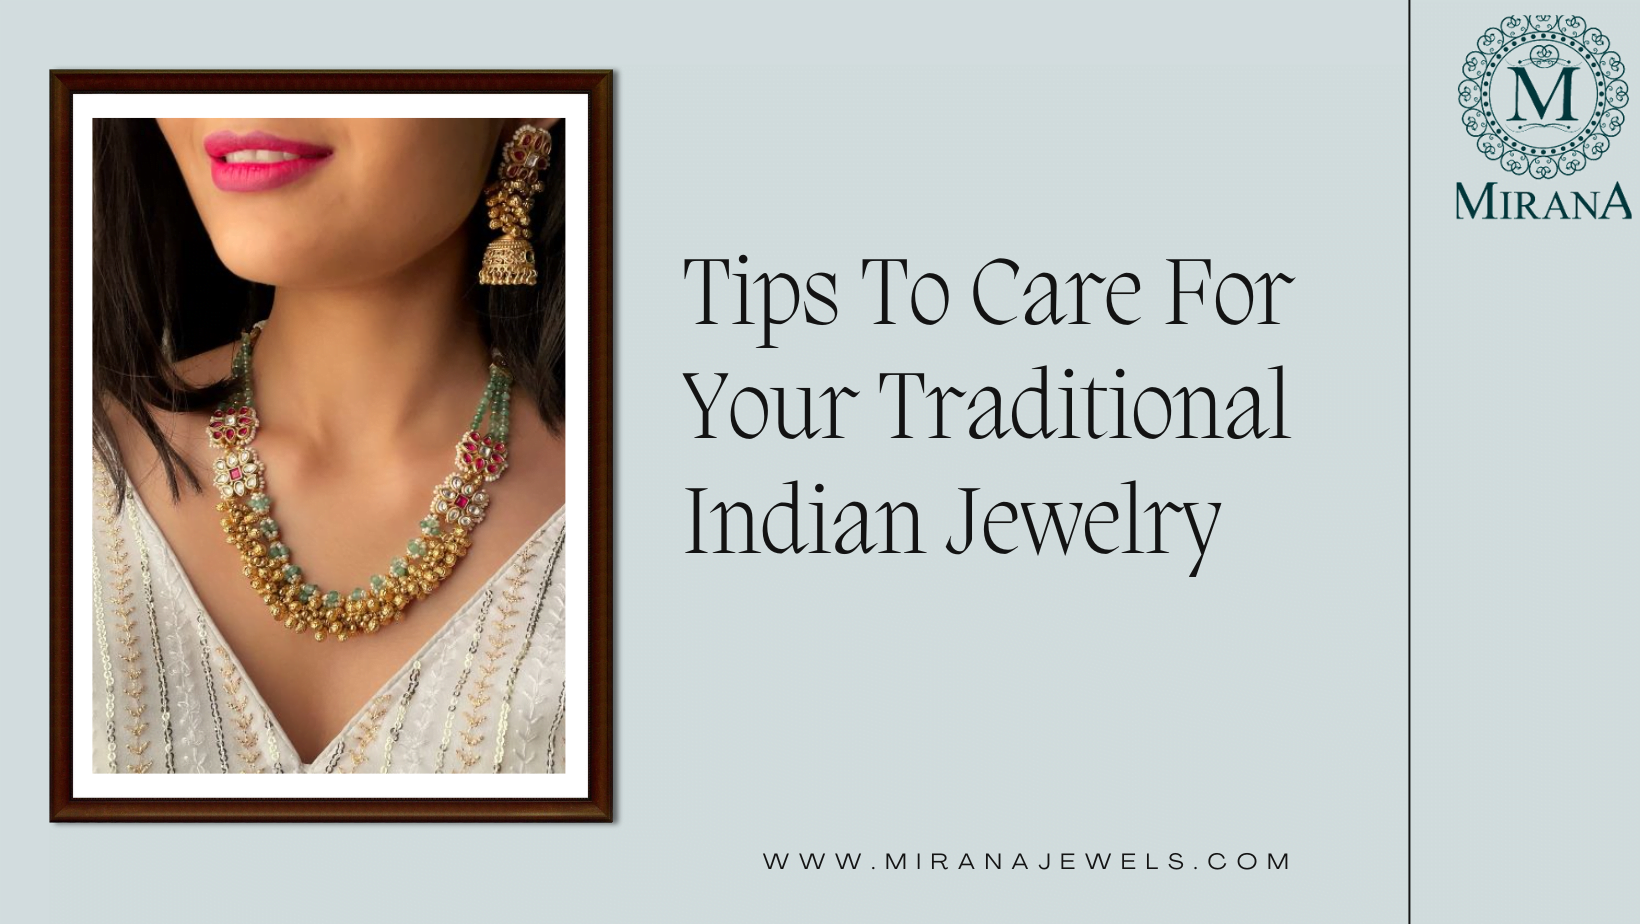 Tips To Care For Your Traditional Indian Jewelry